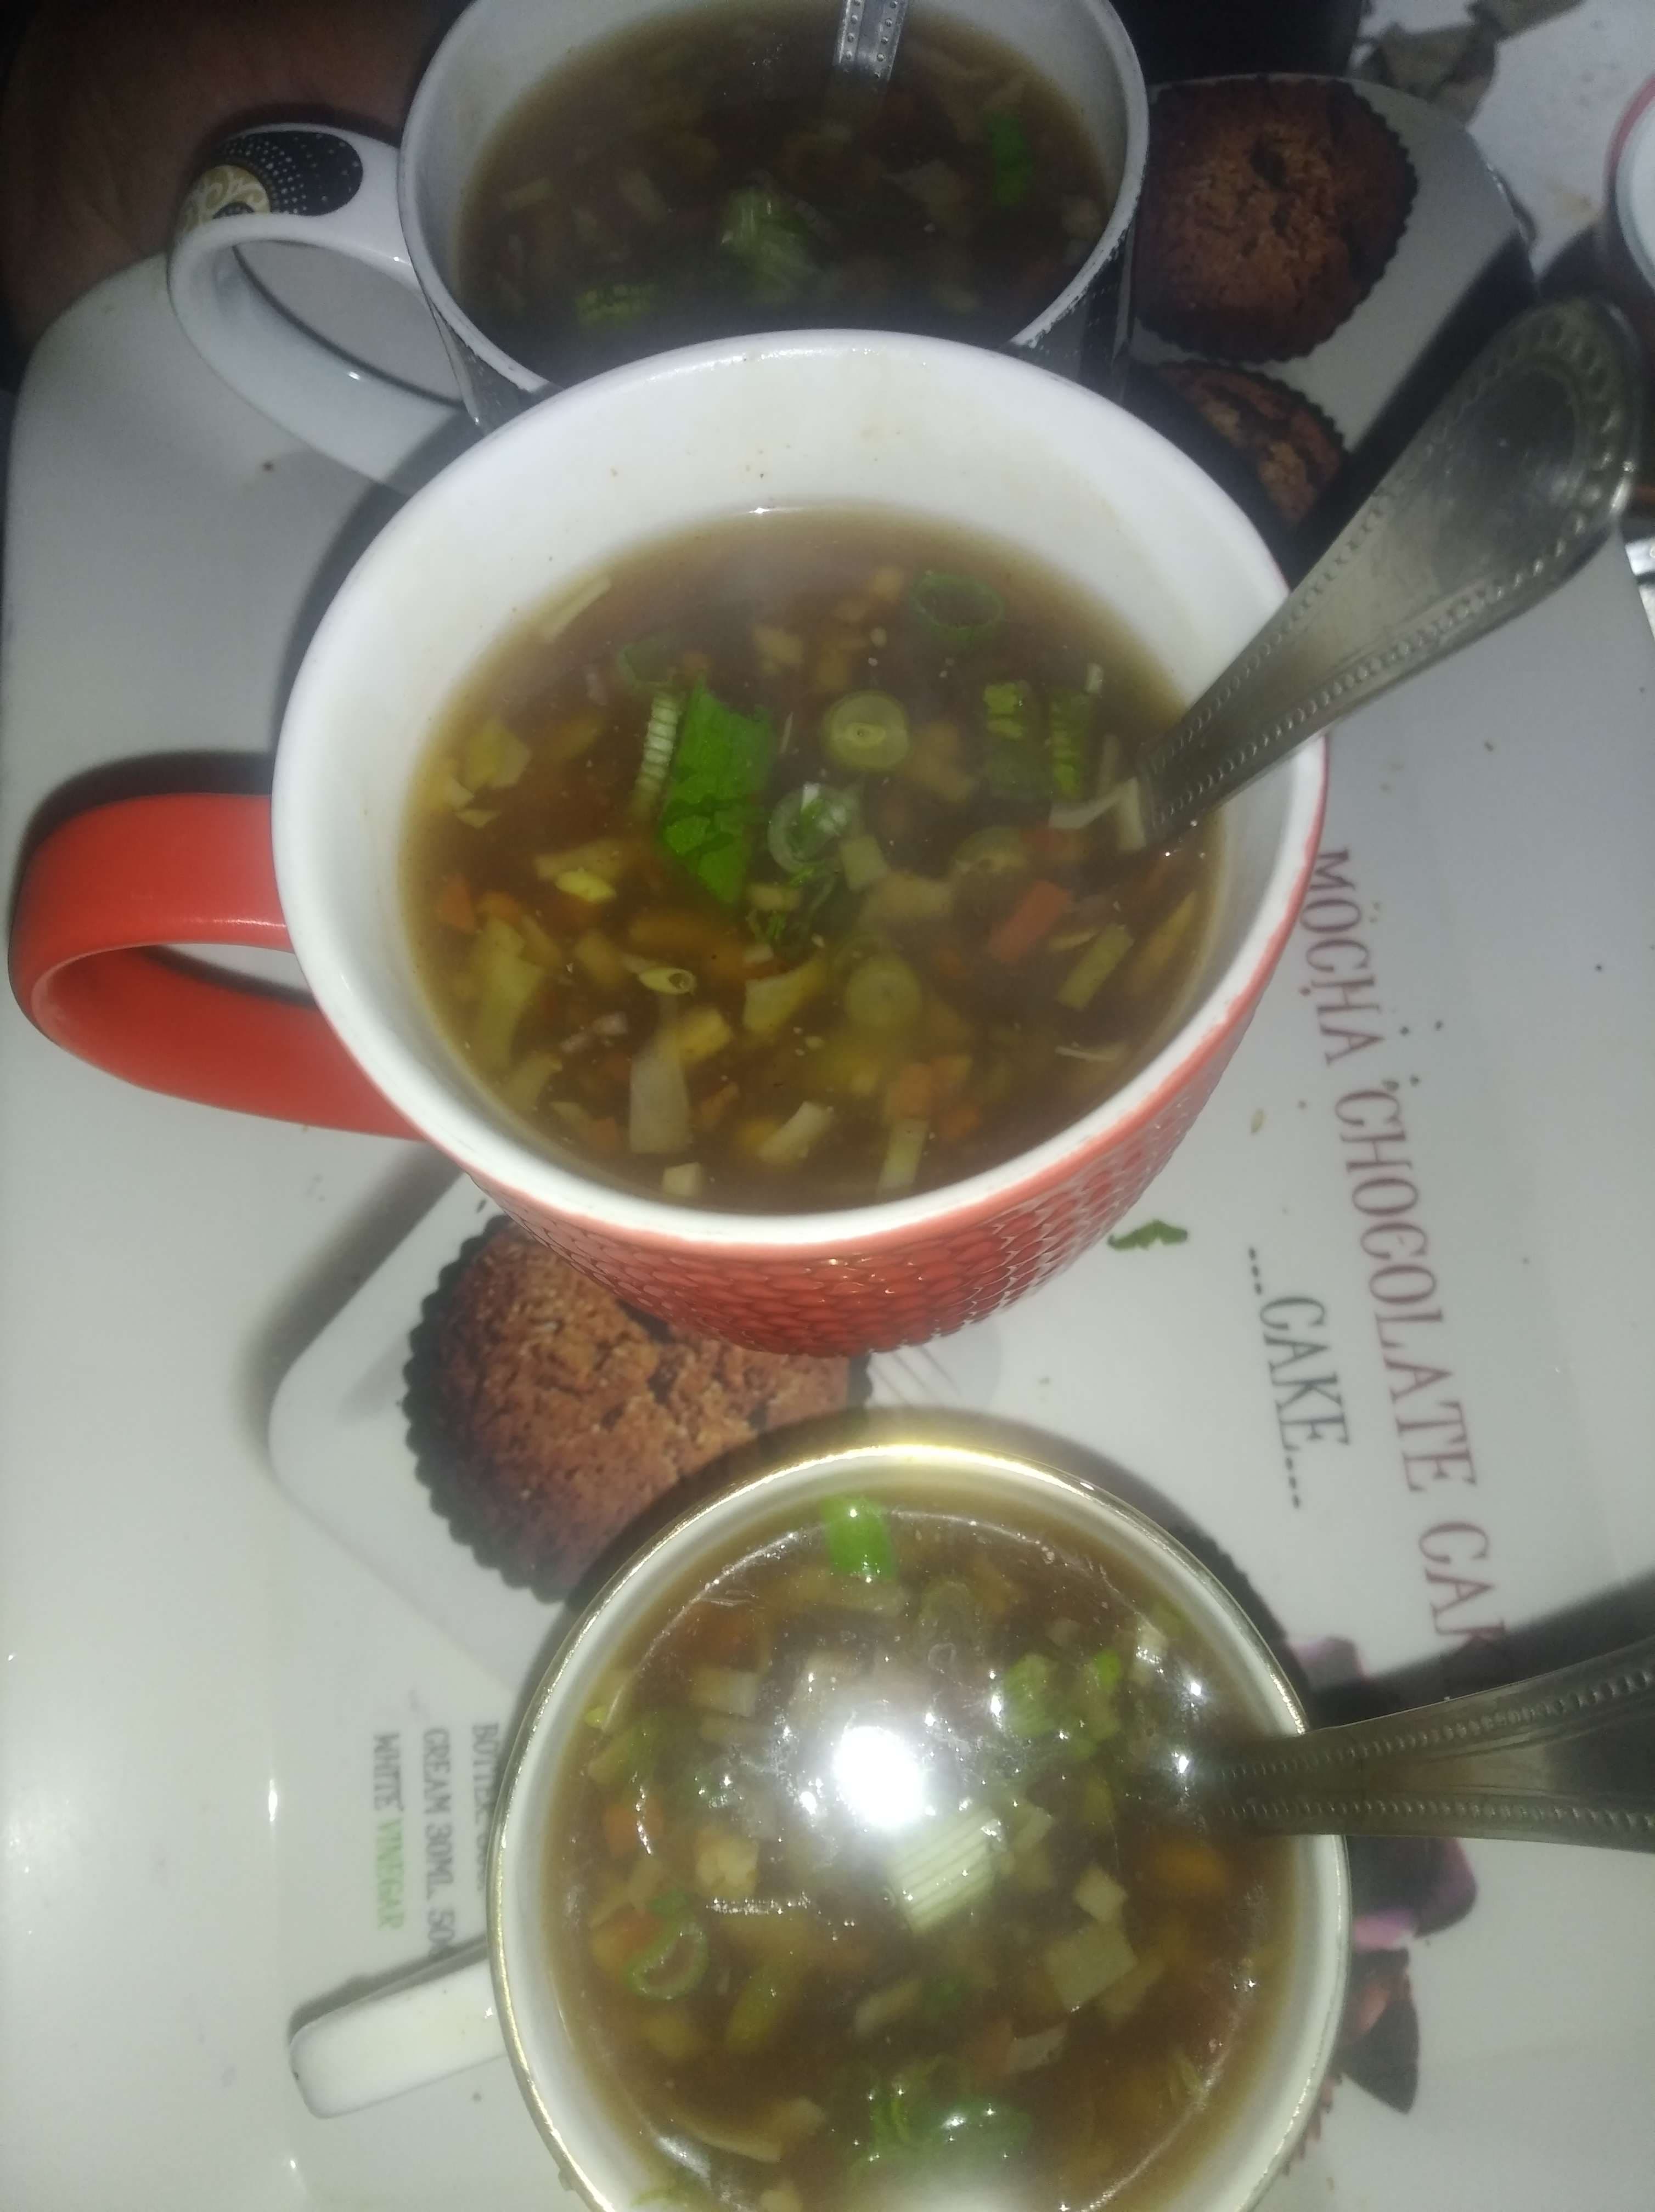 Tasty Vegetable Manchow Soup cooked by COOX chefs cooks during occasions parties events at home